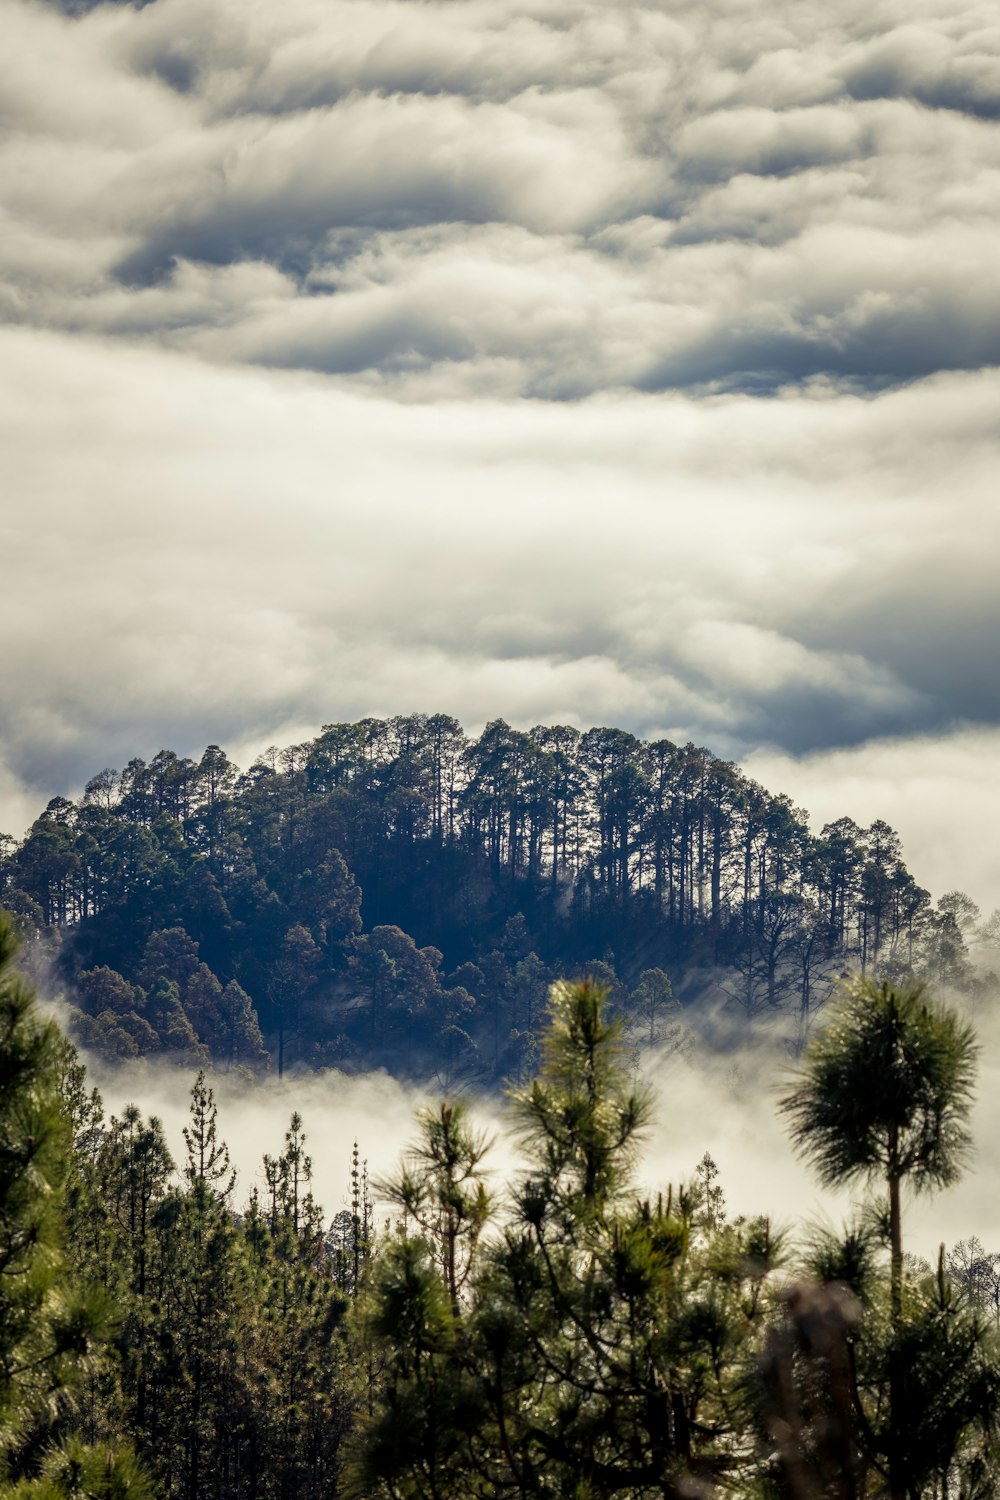 a mountain covered in clouds with trees in the foreground